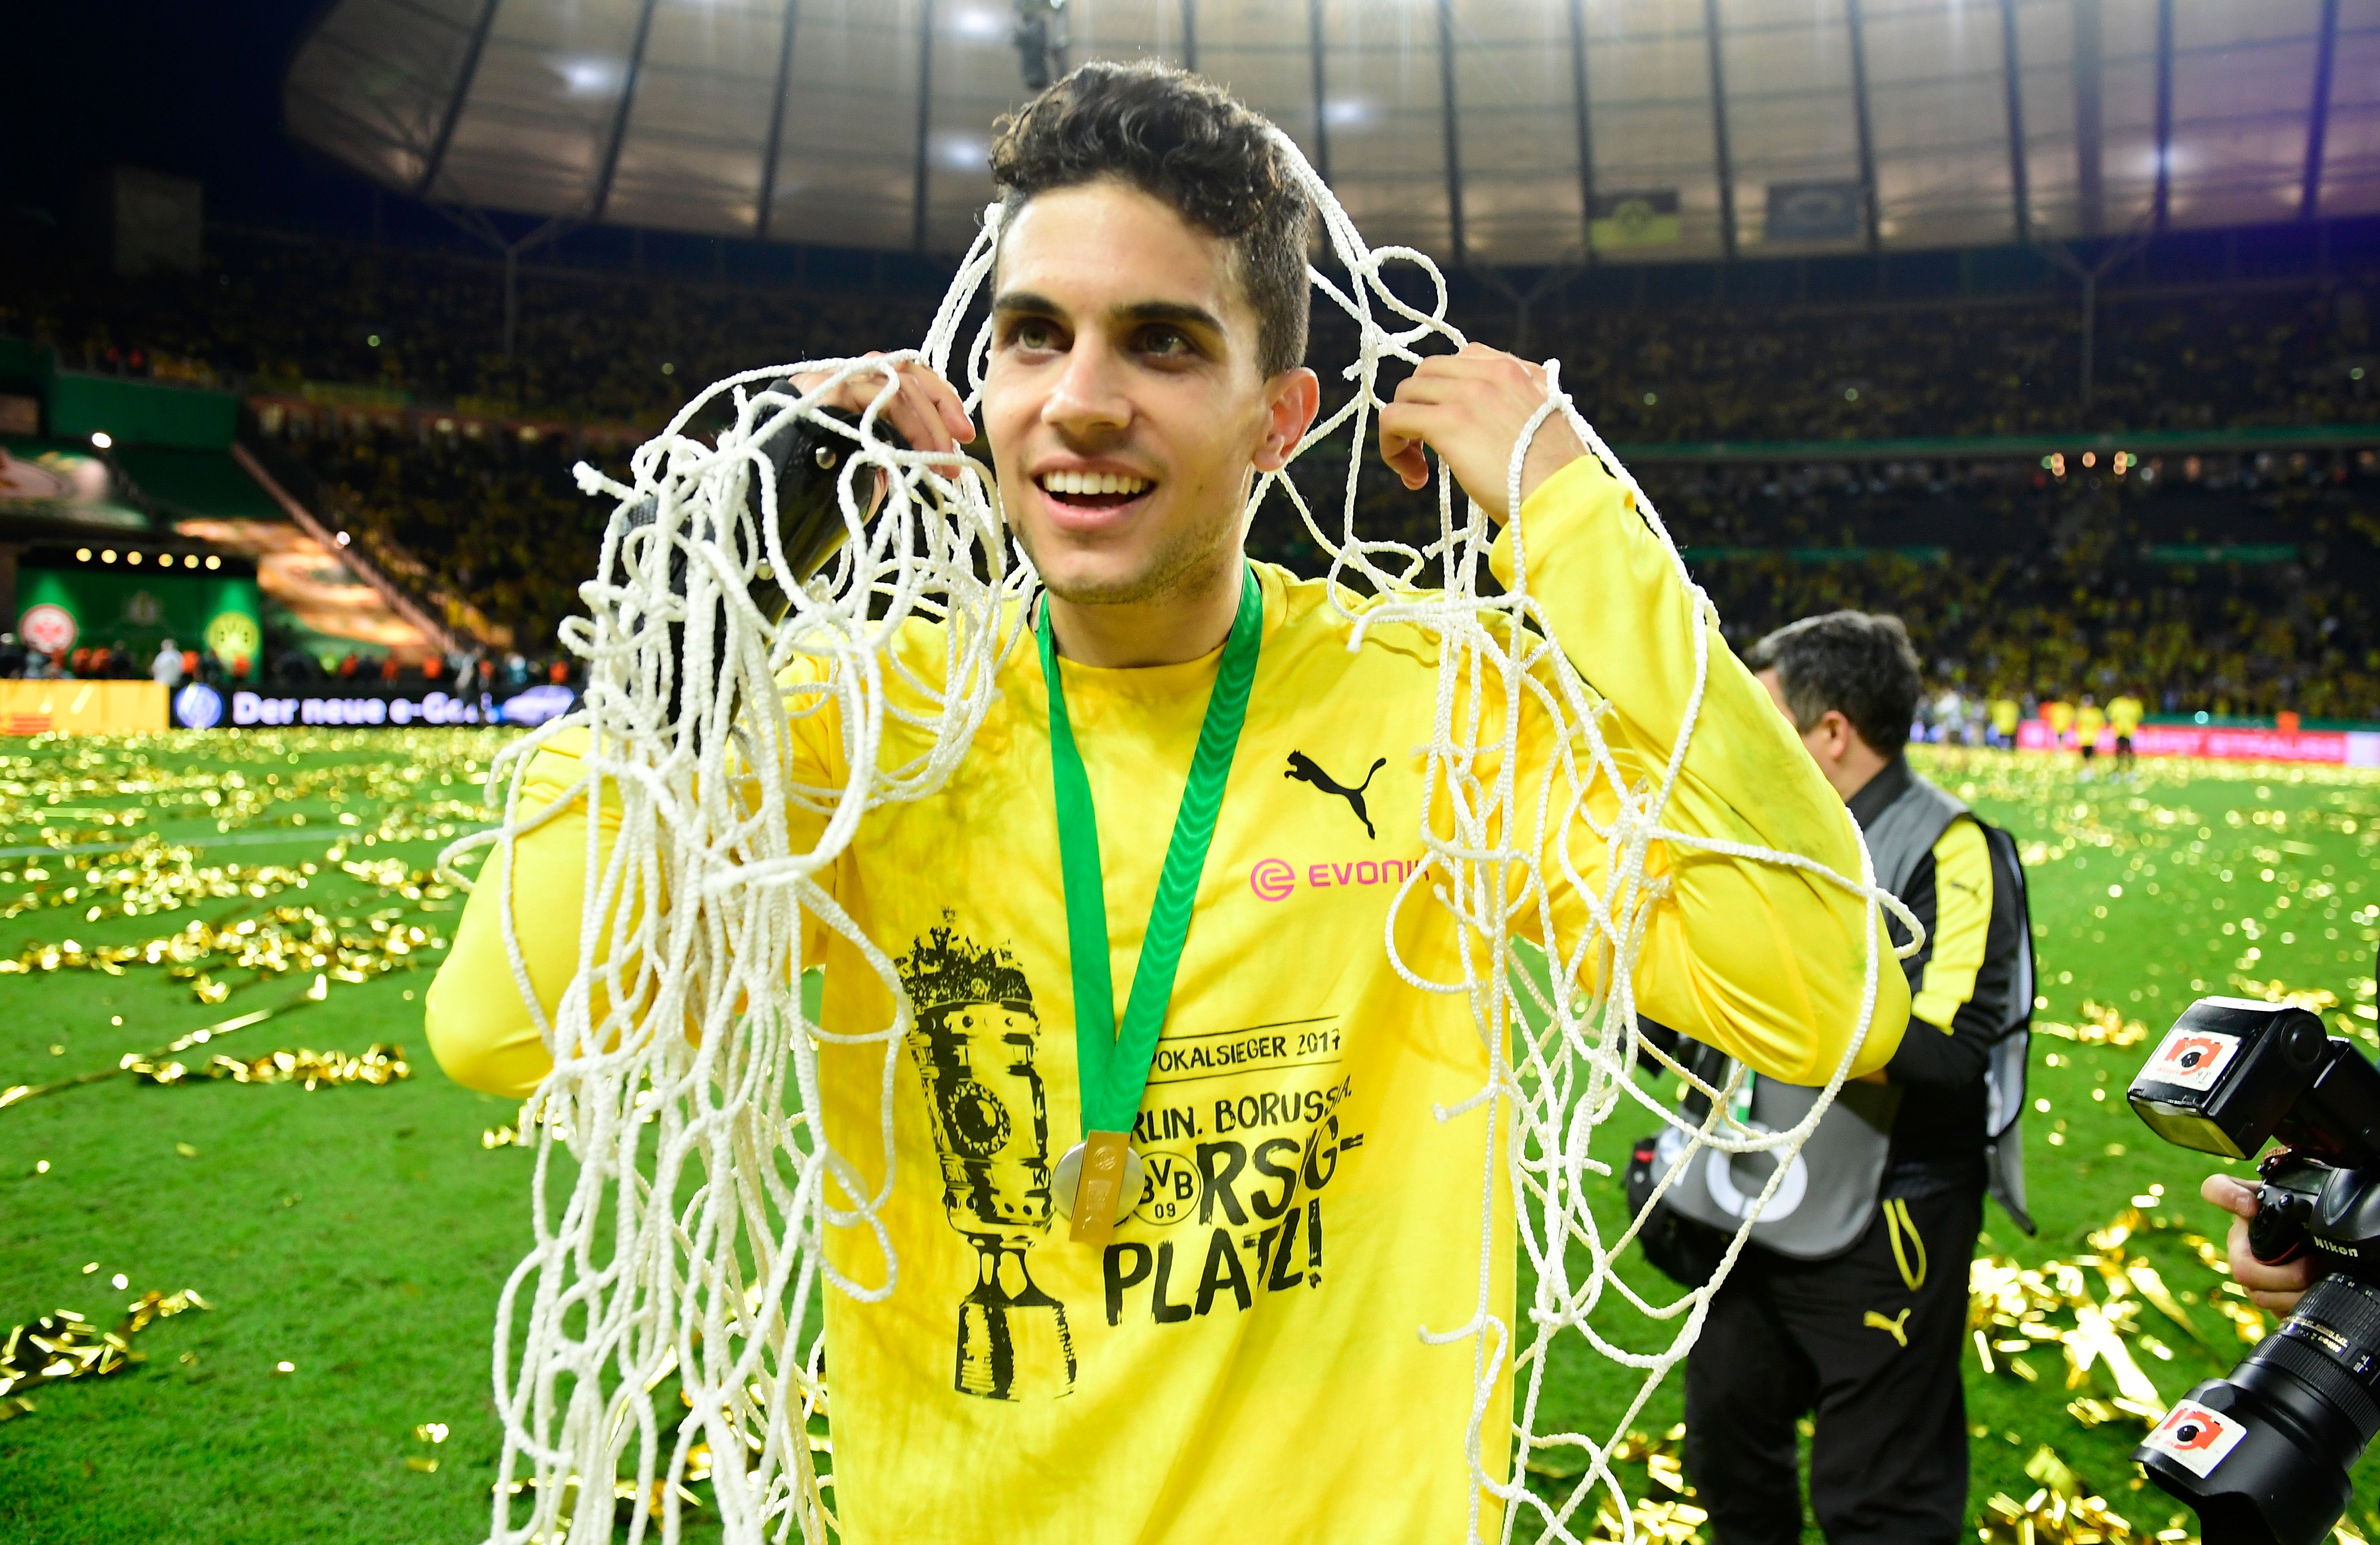 Dortmund's Spanish defender Marc Bartra holds the net after victory during the German Cup (DFB Pokal) final football match Eintracht Frankfurt v BVB Borussia Dortmund at the Olympic stadium in Berlin on May 27, 2017. / AFP PHOTO / Tobias SCHWARZ / RESTRICTIONS: ACCORDING TO DFB RULES IMAGE SEQUENCES TO SIMULATE VIDEO IS NOT ALLOWED DURING MATCH TIME. MOBILE (MMS) USE IS NOT ALLOWED DURING AND FOR FURTHER TWO HOURS AFTER THE MATCH. == RESTRICTED TO EDITORIAL USE == FOR MORE INFORMATION CONTACT DFB DIRECTLY AT +49 69 67880

 /         (Photo credit should read TOBIAS SCHWARZ/AFP/Getty Images)